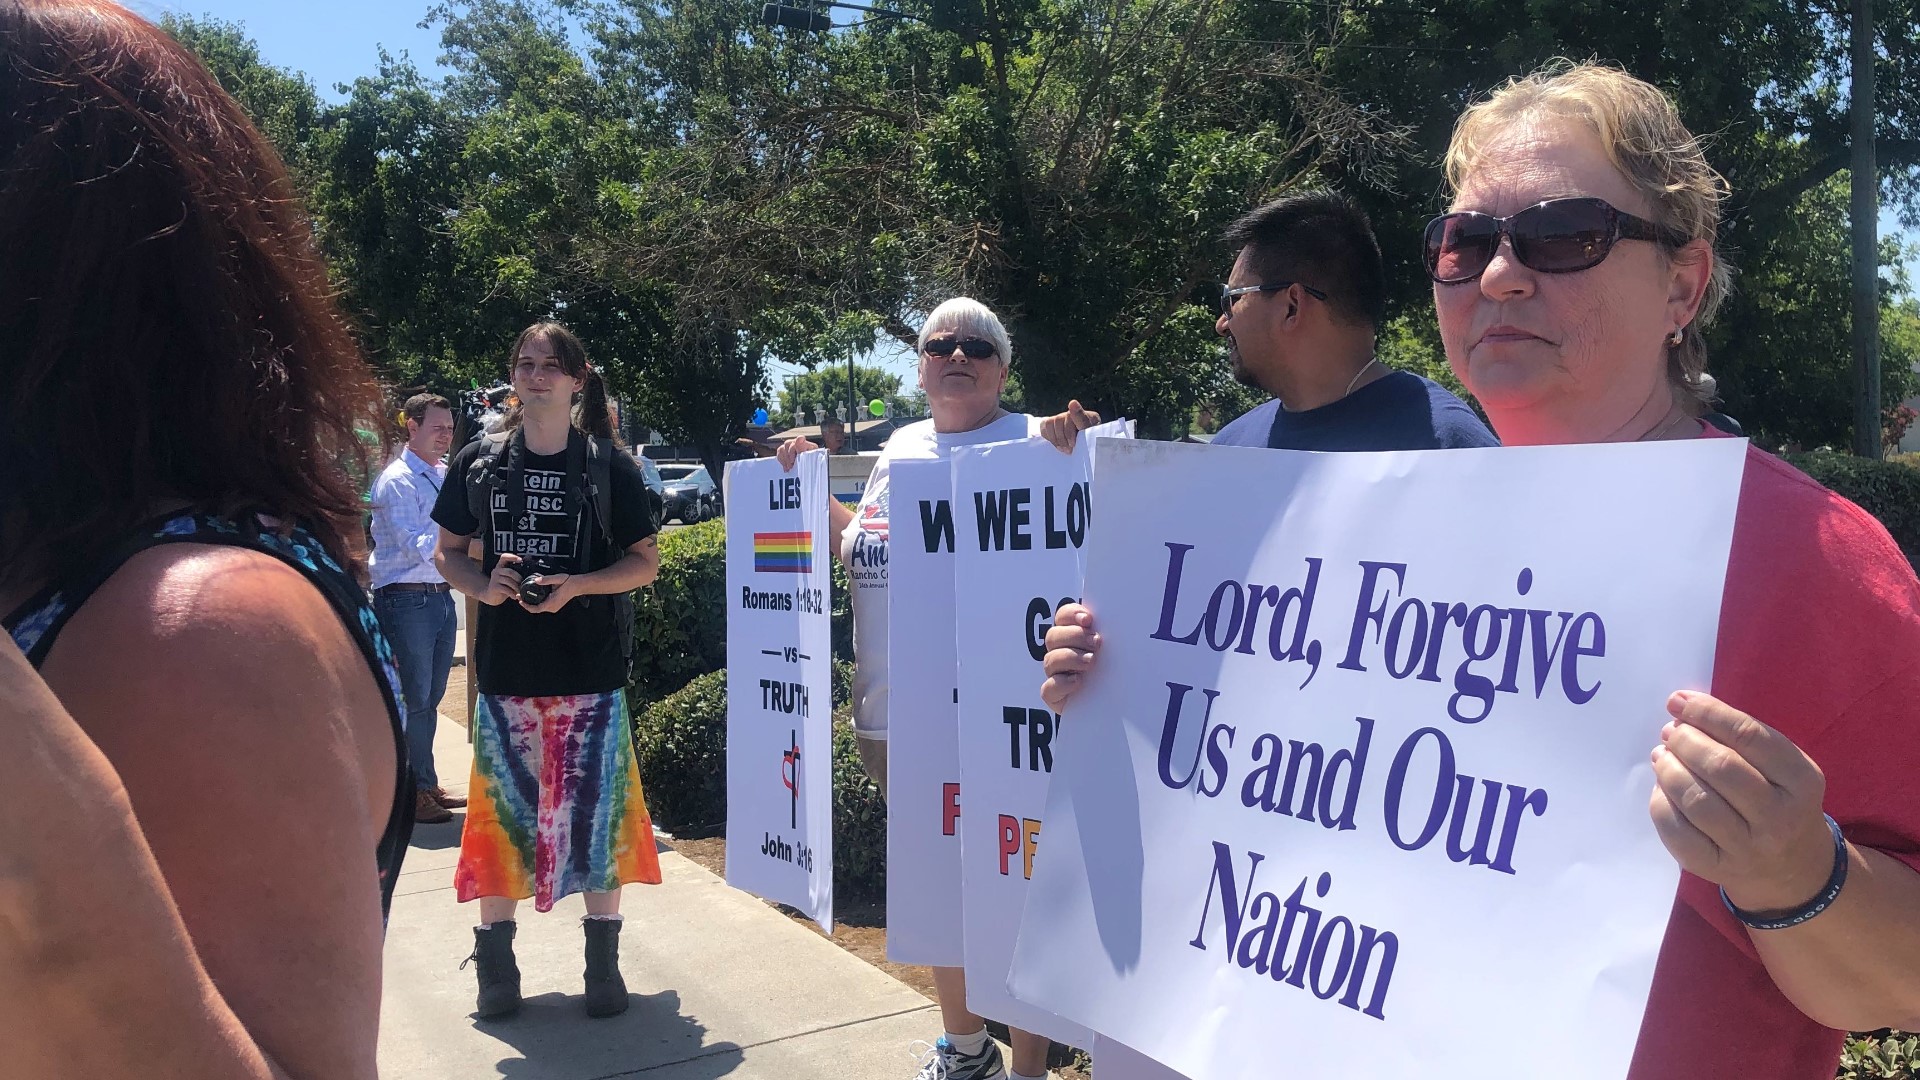 After weeks of setbacks and changes, a controversial "Straight Pride" event finally took root in Modesto. The event was generally considered peaceful, but passionate people came in droves to support and oppose the event.